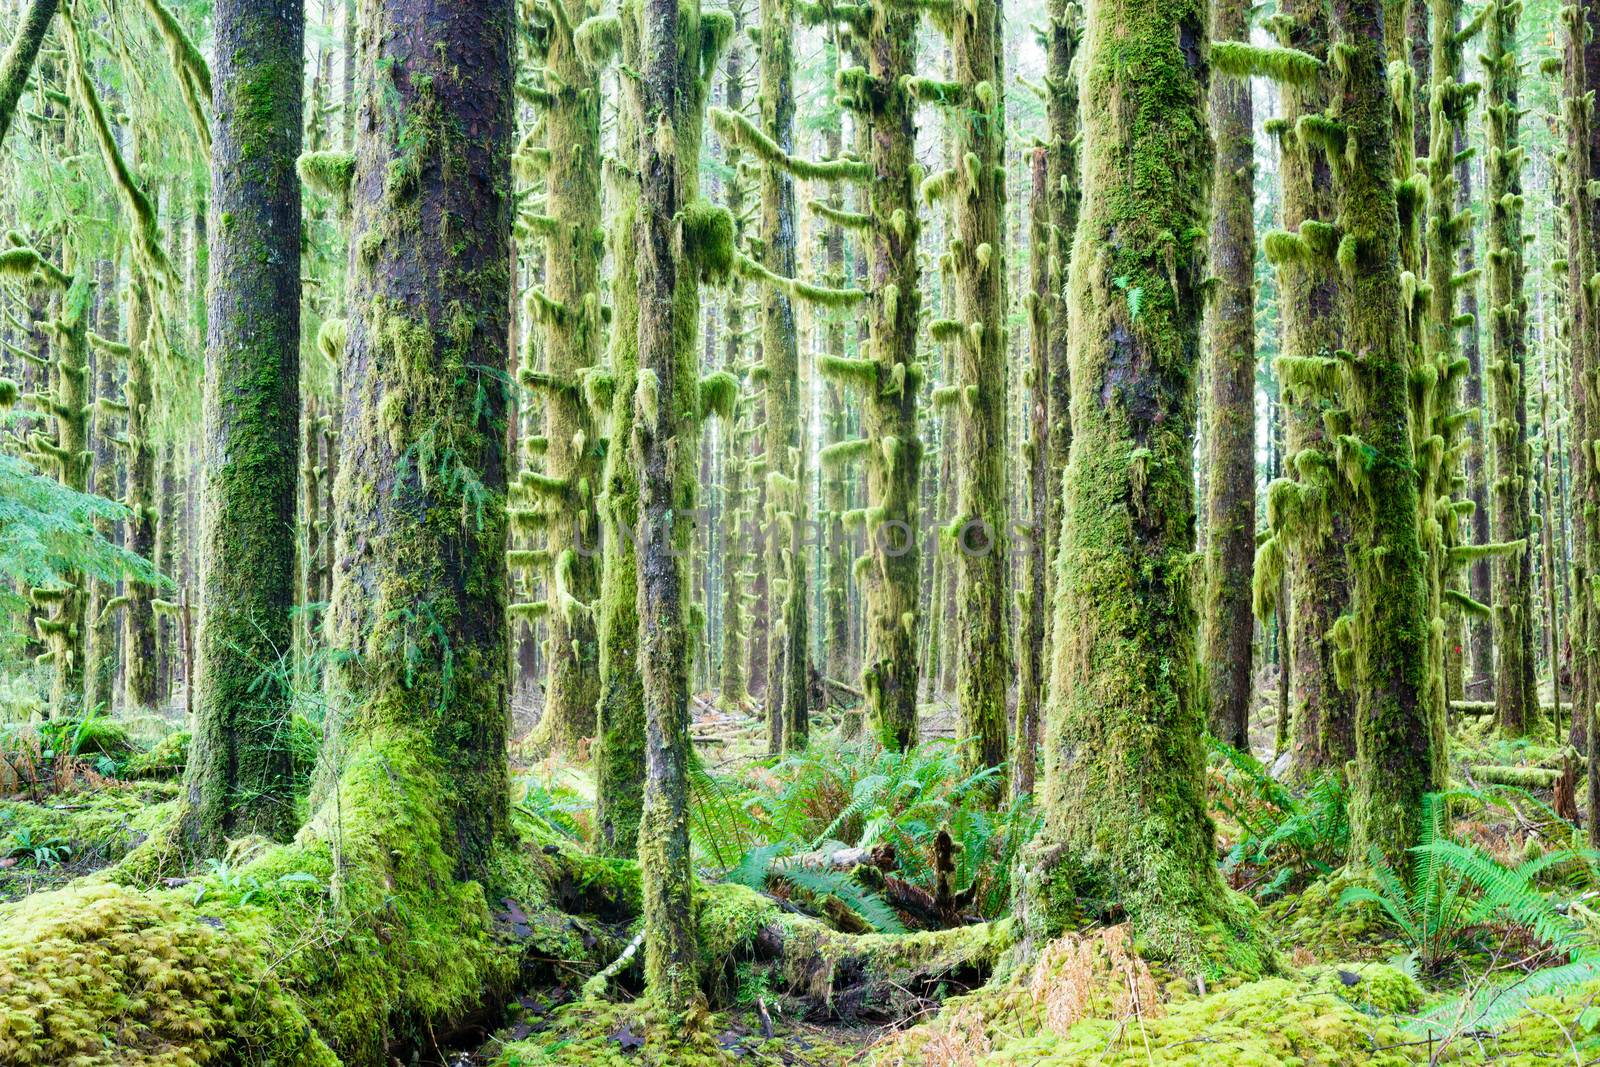 Trees growing in a tight pattern in a dense moss covered forest